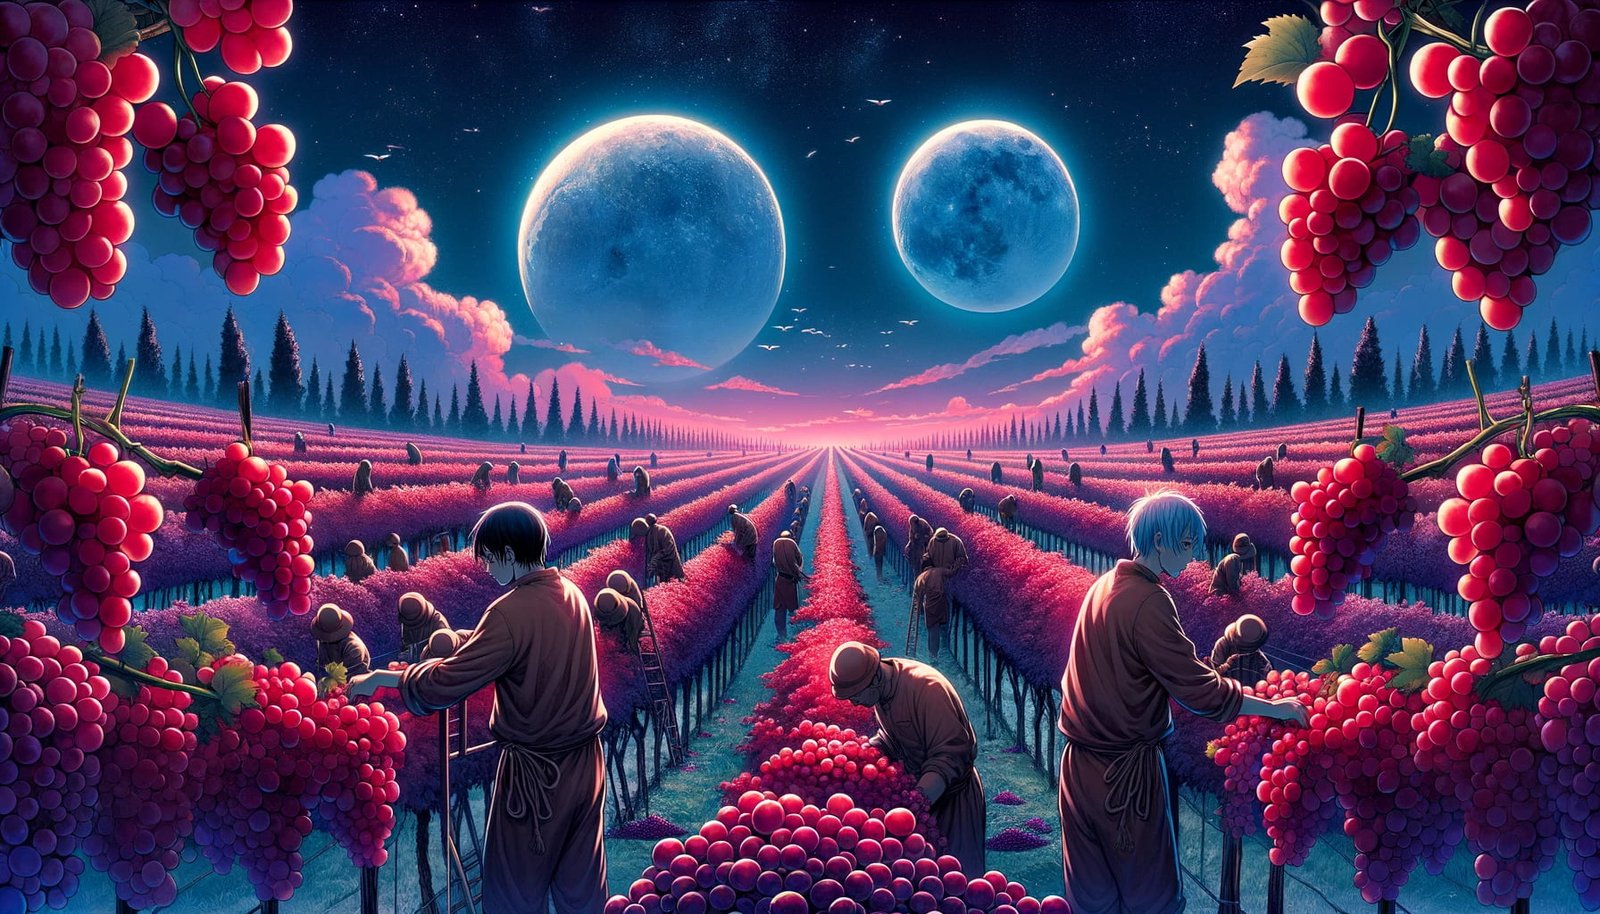 Magical vineyard with red grapes and two silver moons in the sky